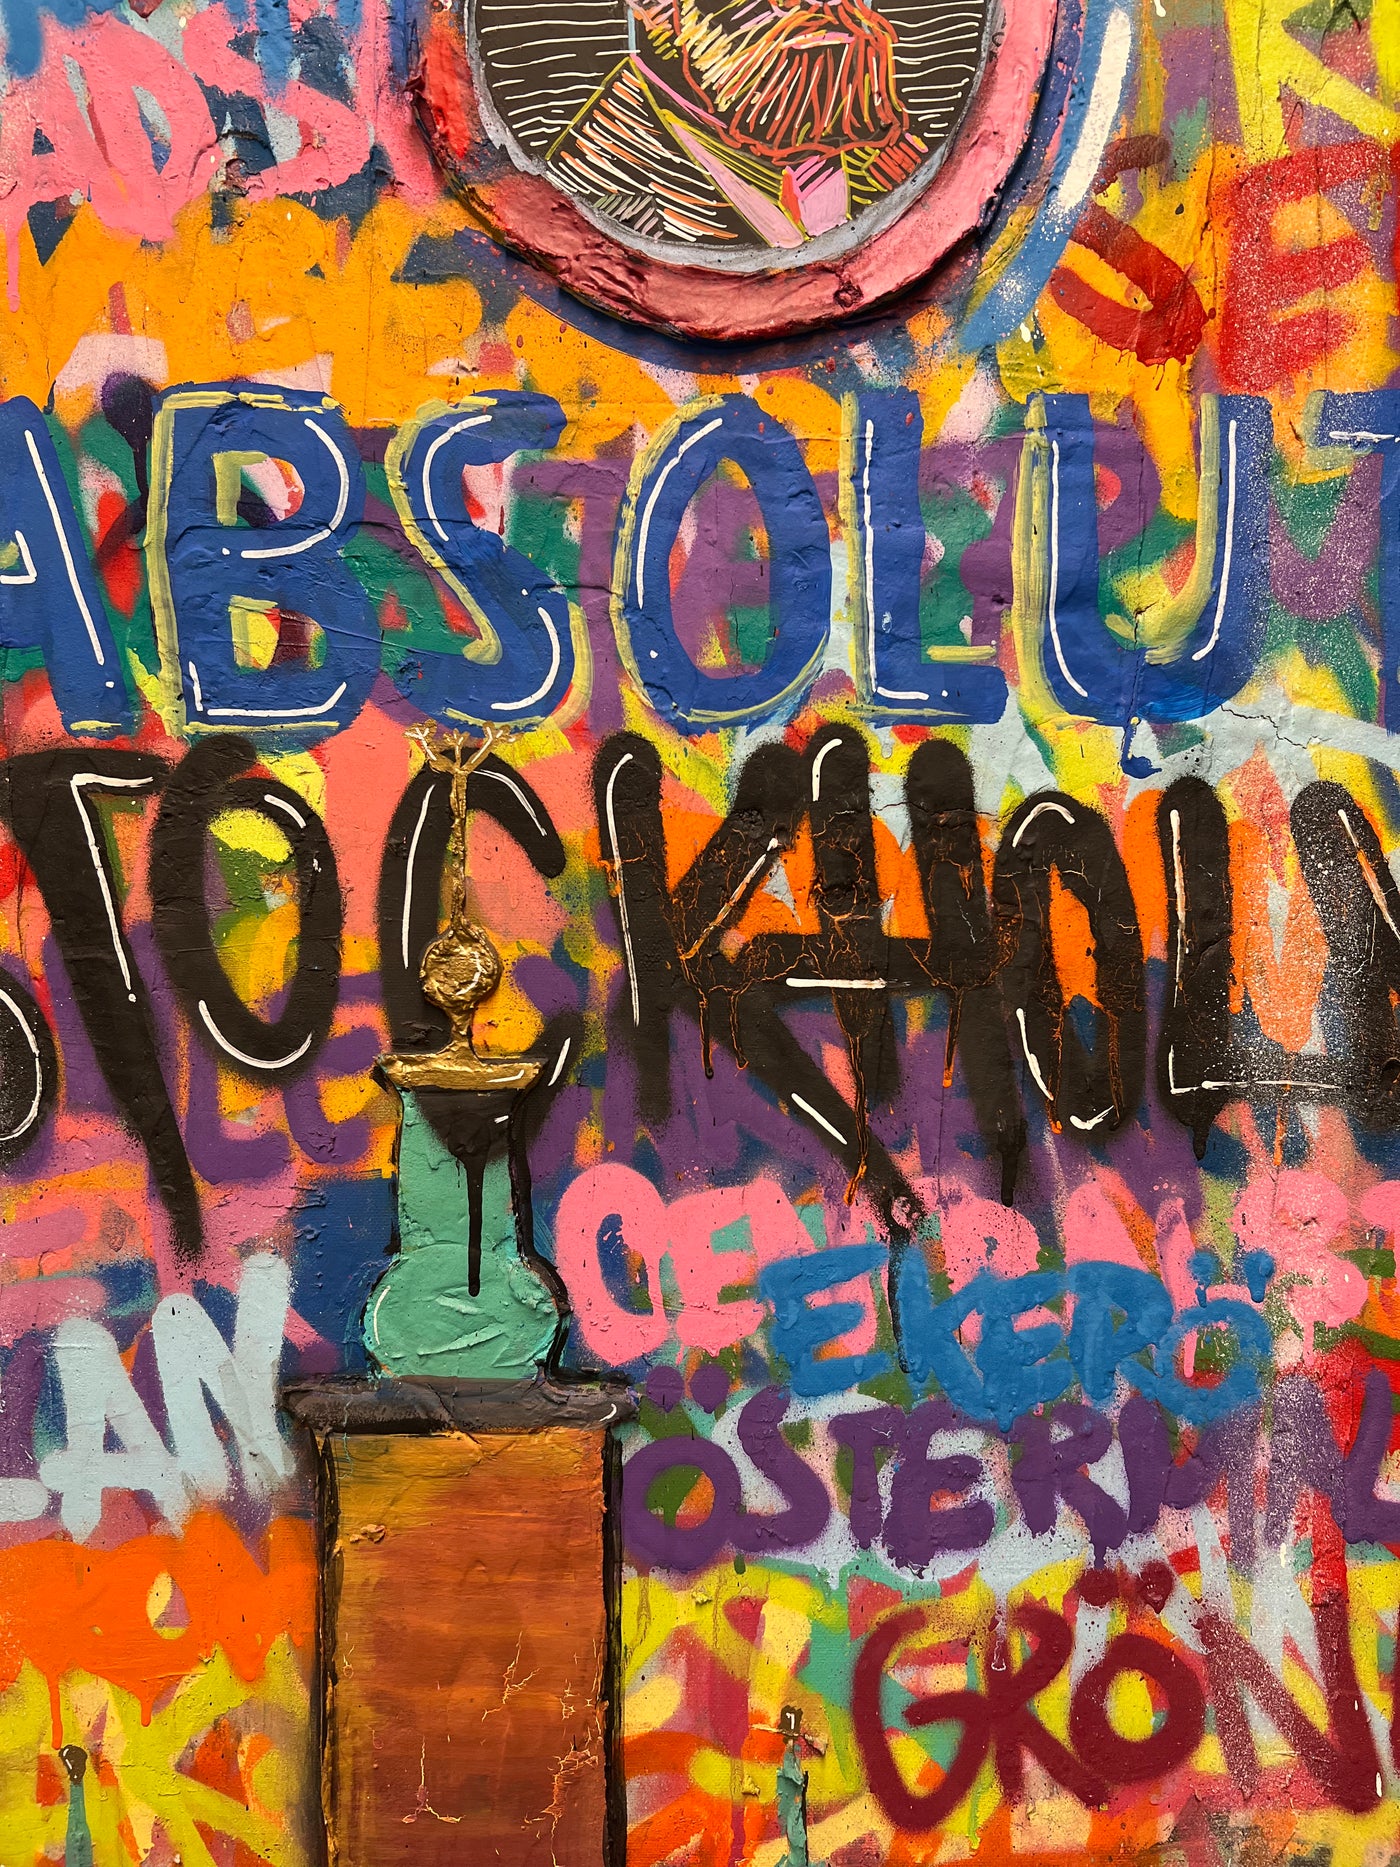 Close up on the Painting of an customized absolut vodka bottle, instead of absolut vodka it says absolut Stockholm 